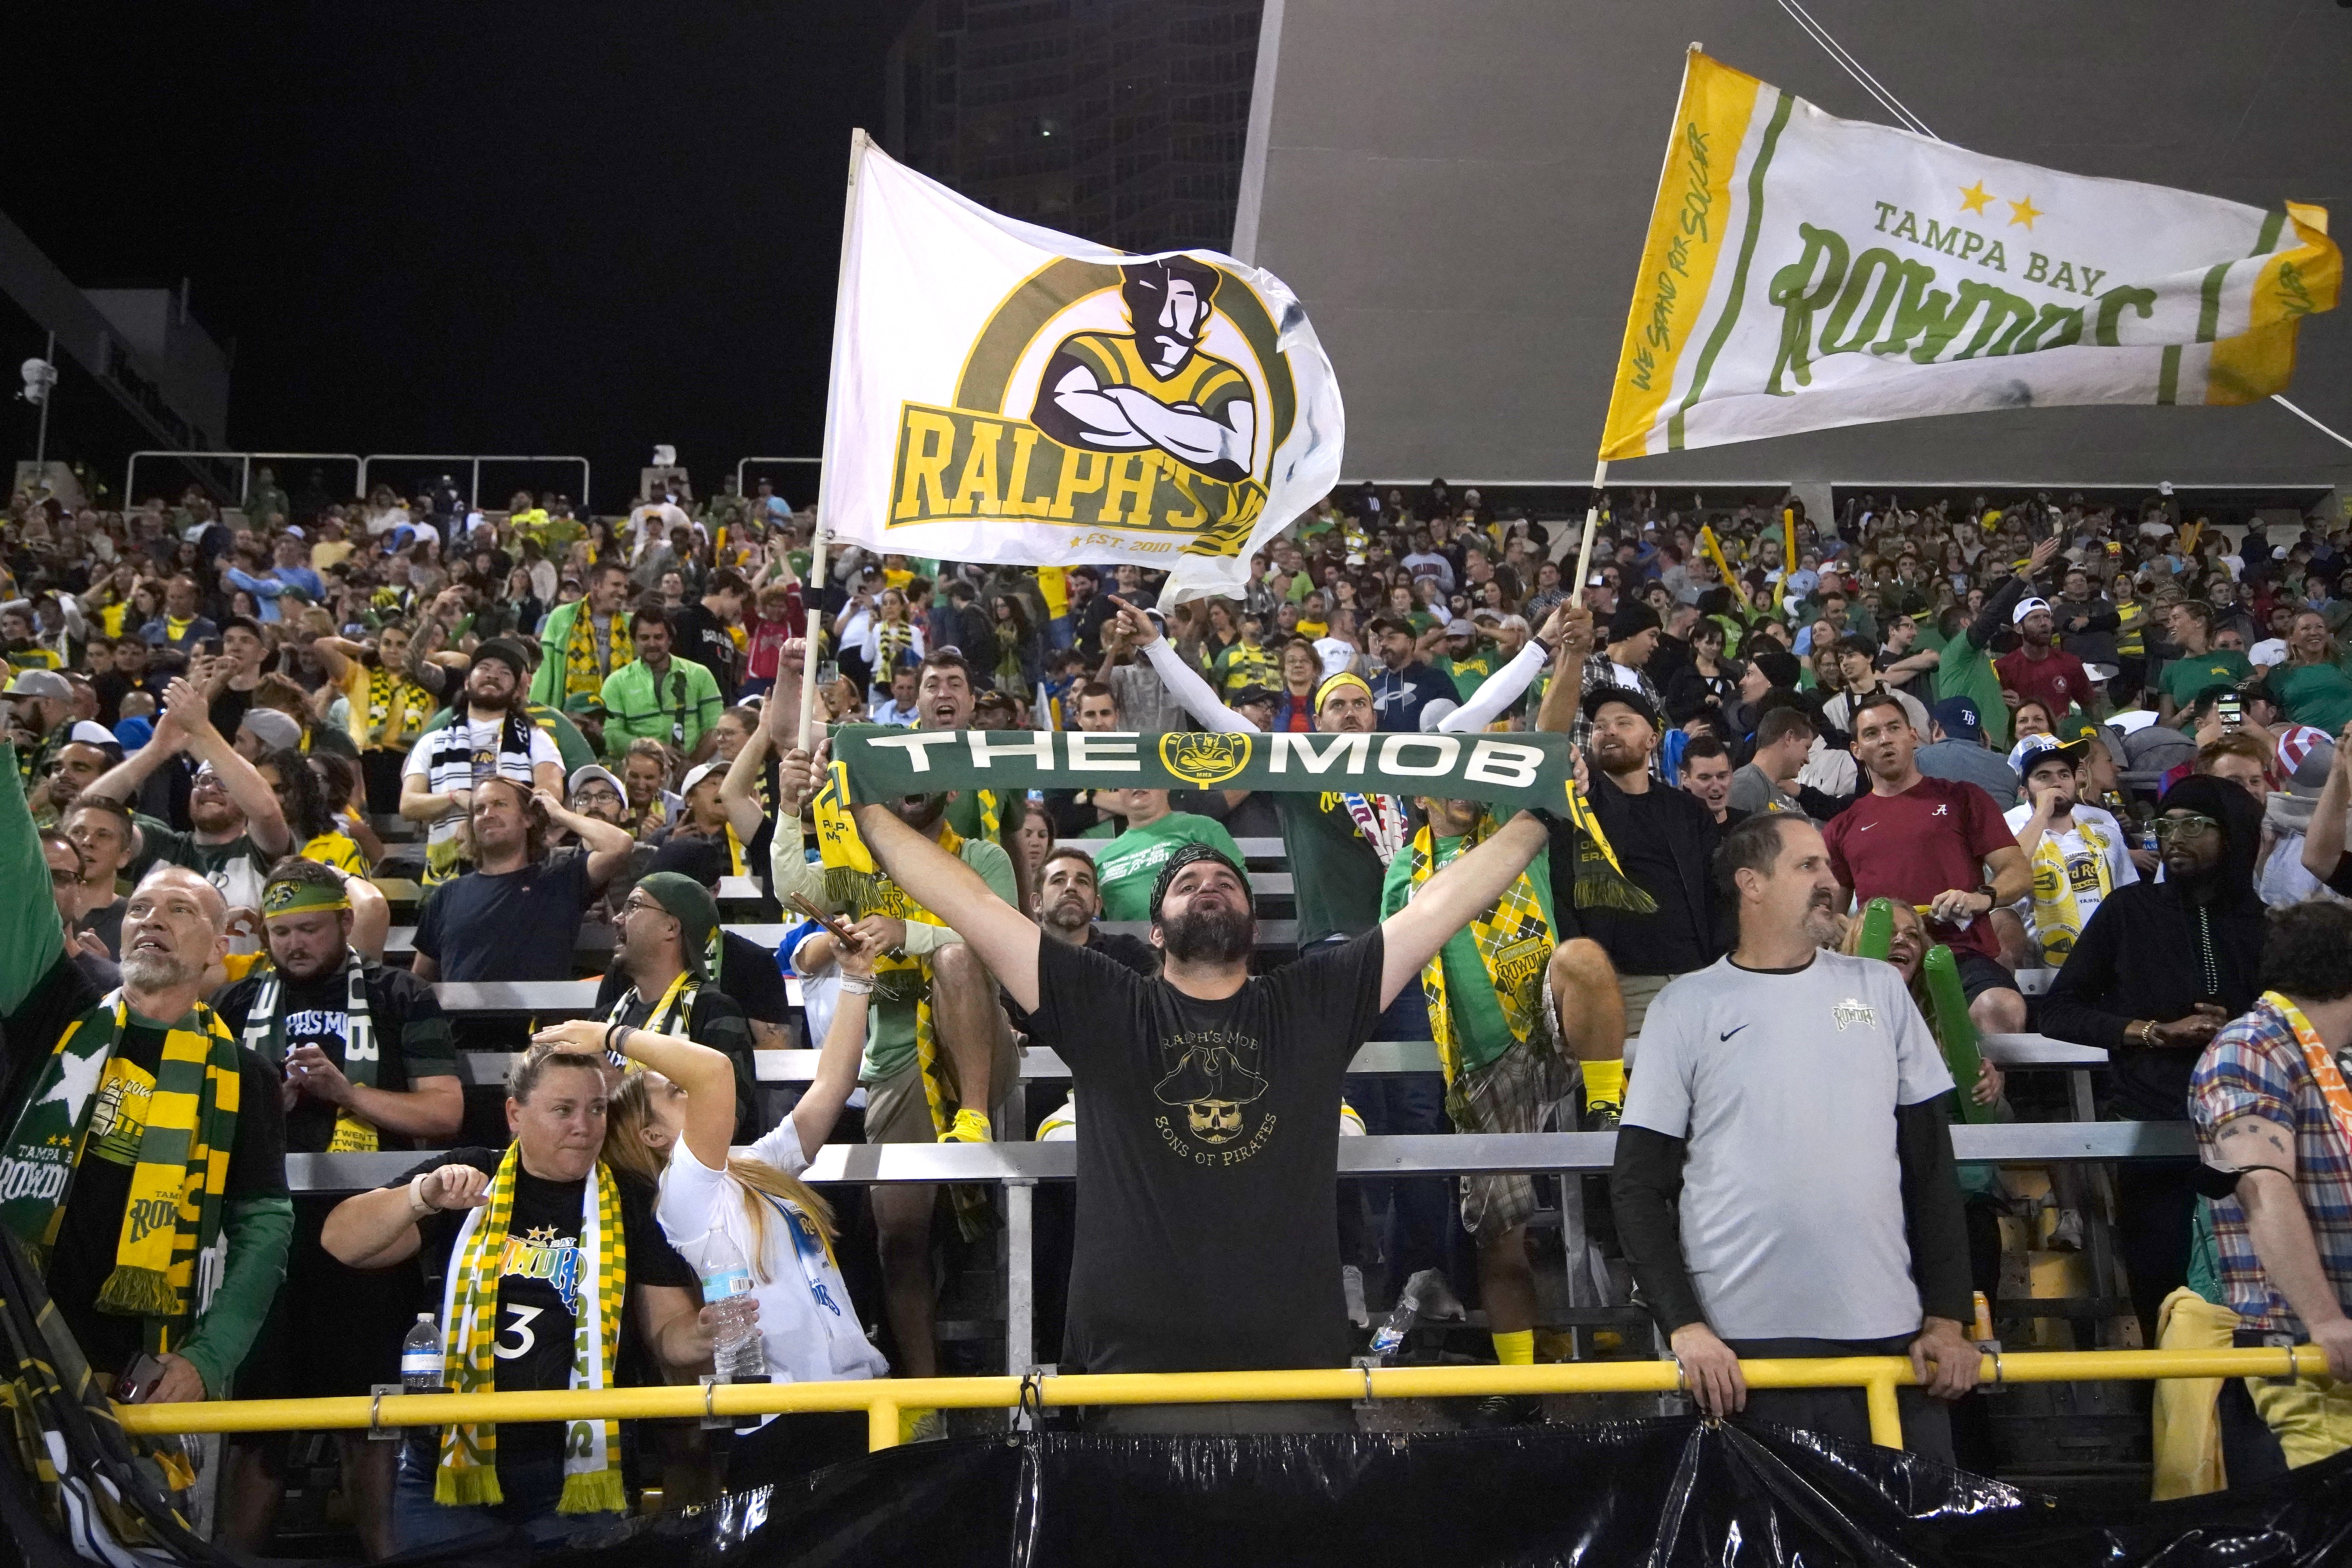 Tampa Bay Rowdies - Open Cup fever has taken hold for today's Throwback  Thursday, presented by tbt* Newspaper. Flashing back to May 29, 2013, when  the Rowdies slayed the @Sounders 1-0. Rowdies